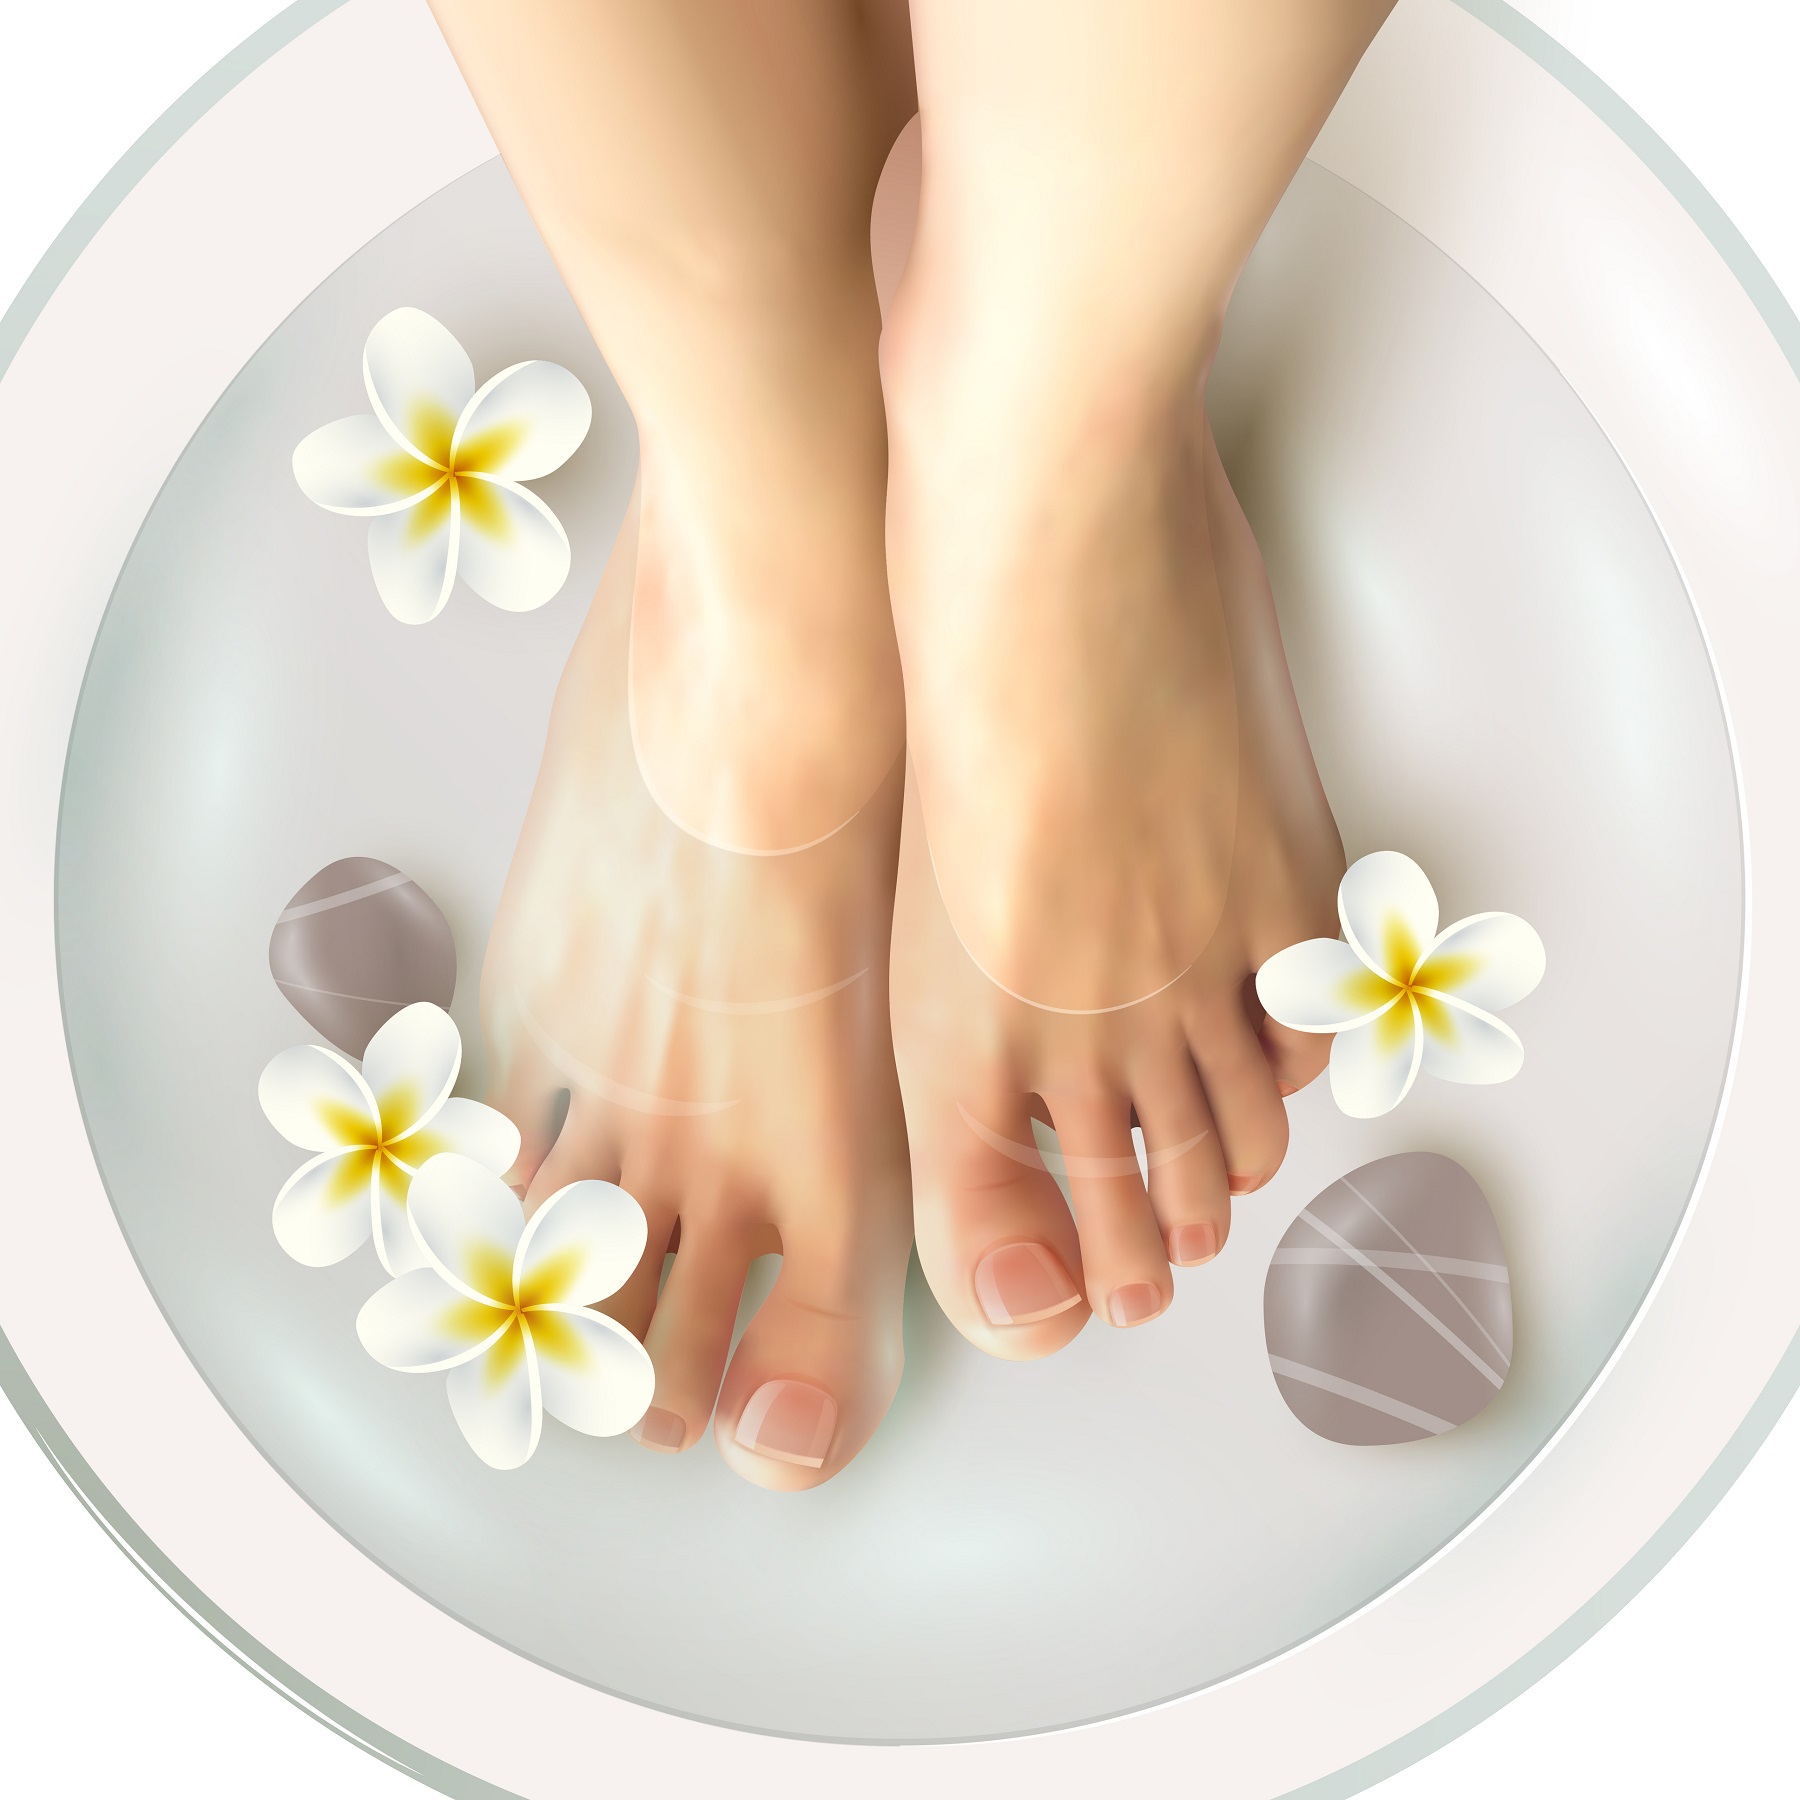 Pedicure spa female feet in spa bowl with water flowers and stones realistic vector illustration